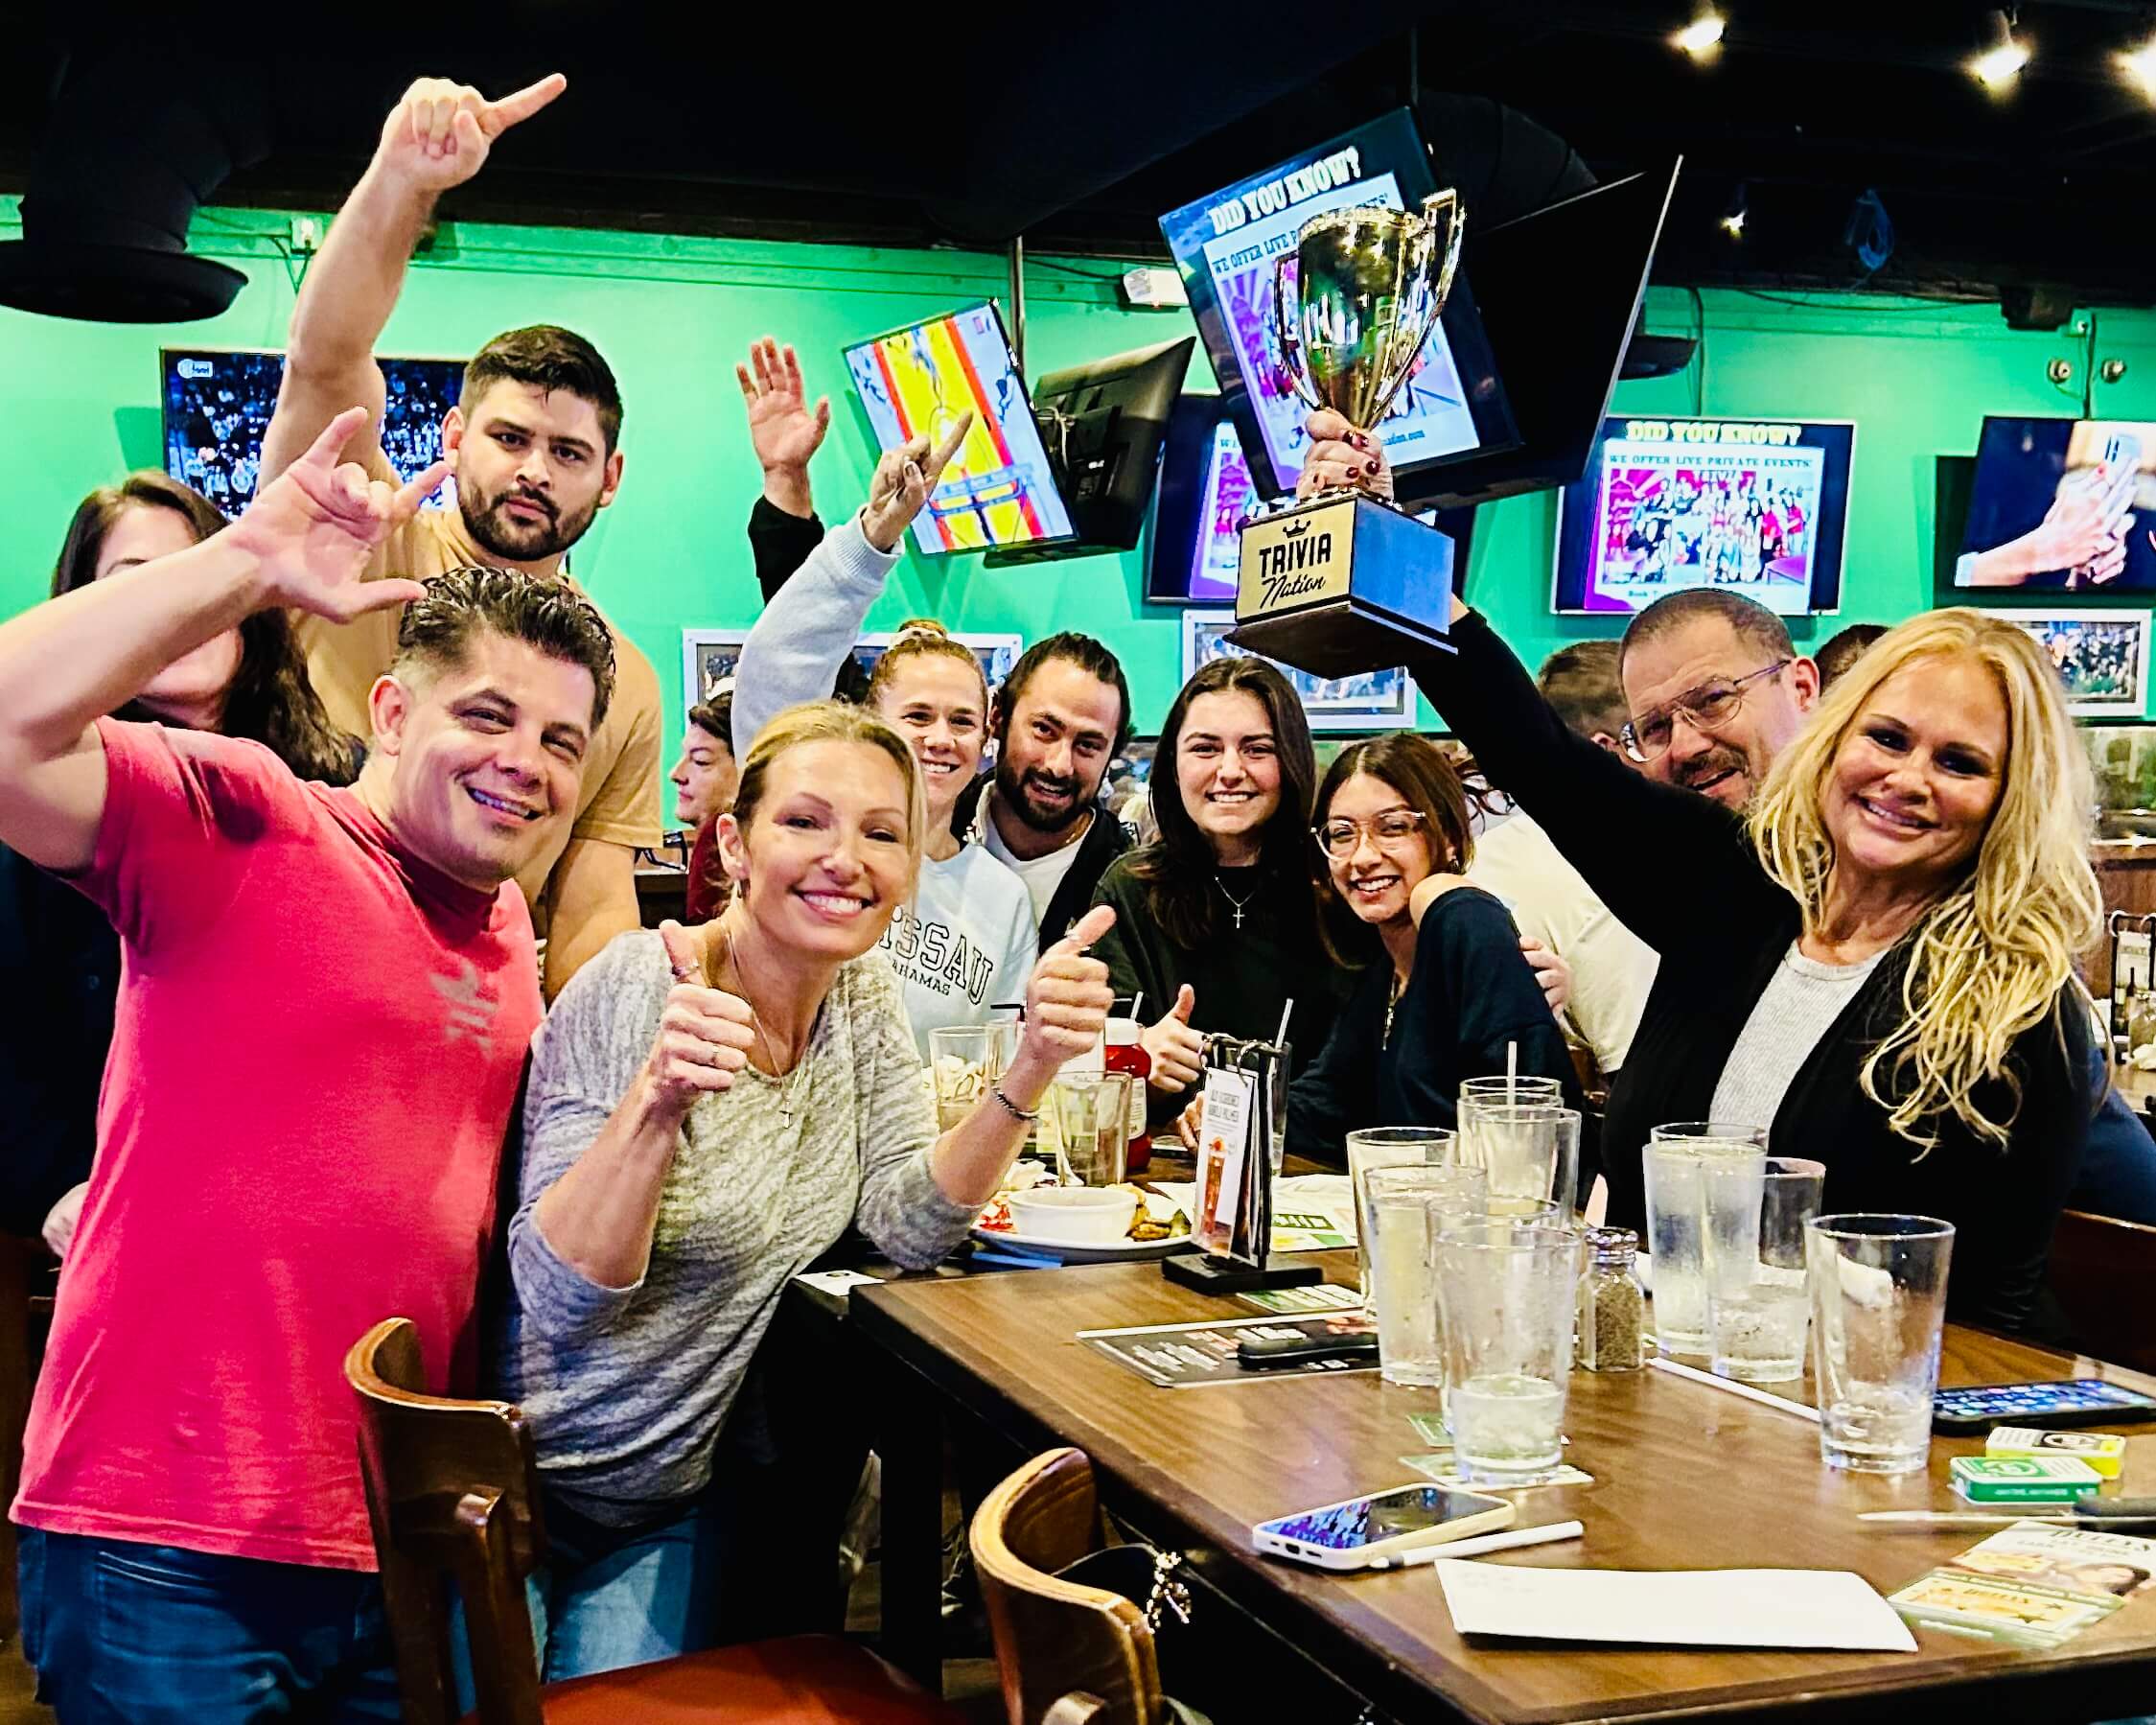 Duffy's Sports Grill Deerfield Beach FL 33441 trivia night: large group of adults having fun and smiling while gathered around a table with some of them holding their hands up and making a "number one" gesture with the woman in front holding a Trivia Nation trophy